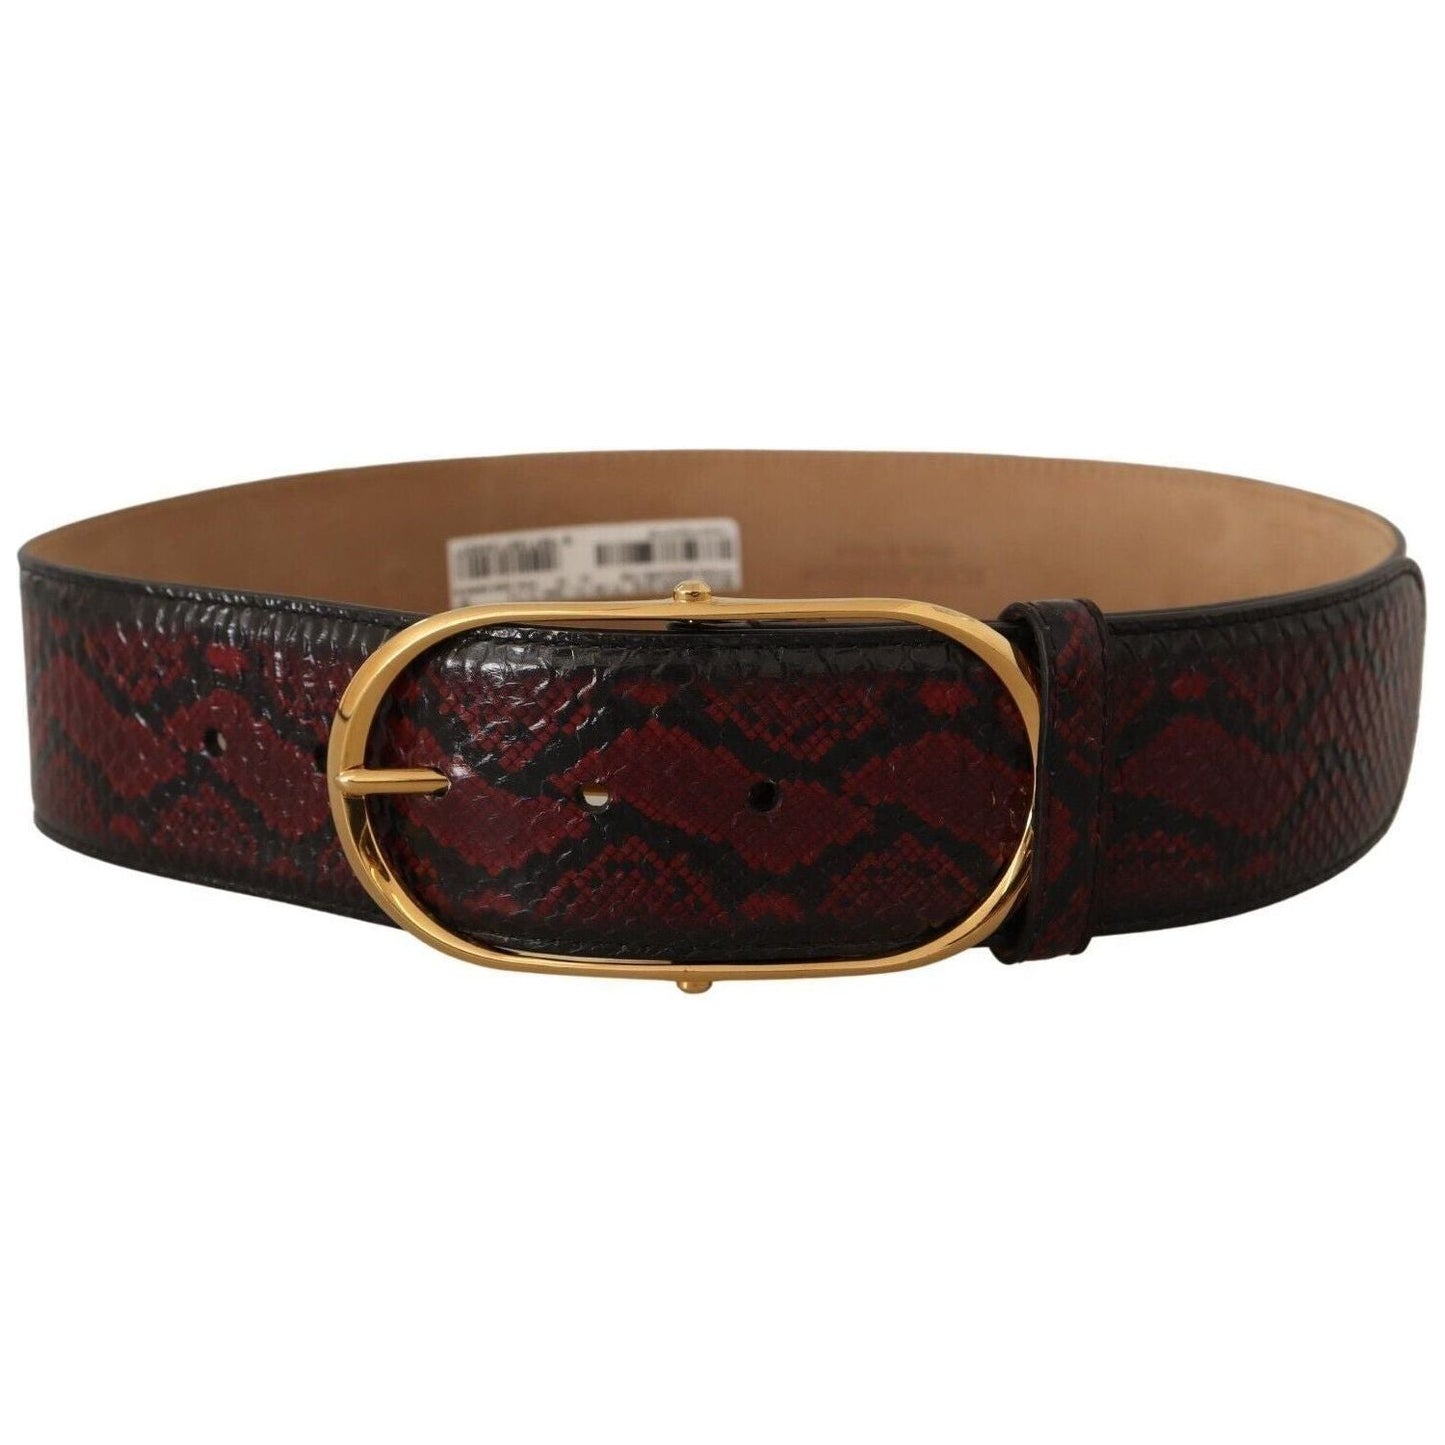 Dolce & Gabbana Elegant Red Python Leather Belt with Gold Buckle WOMAN BELTS red-exotic-leather-gold-oval-buckle-belt